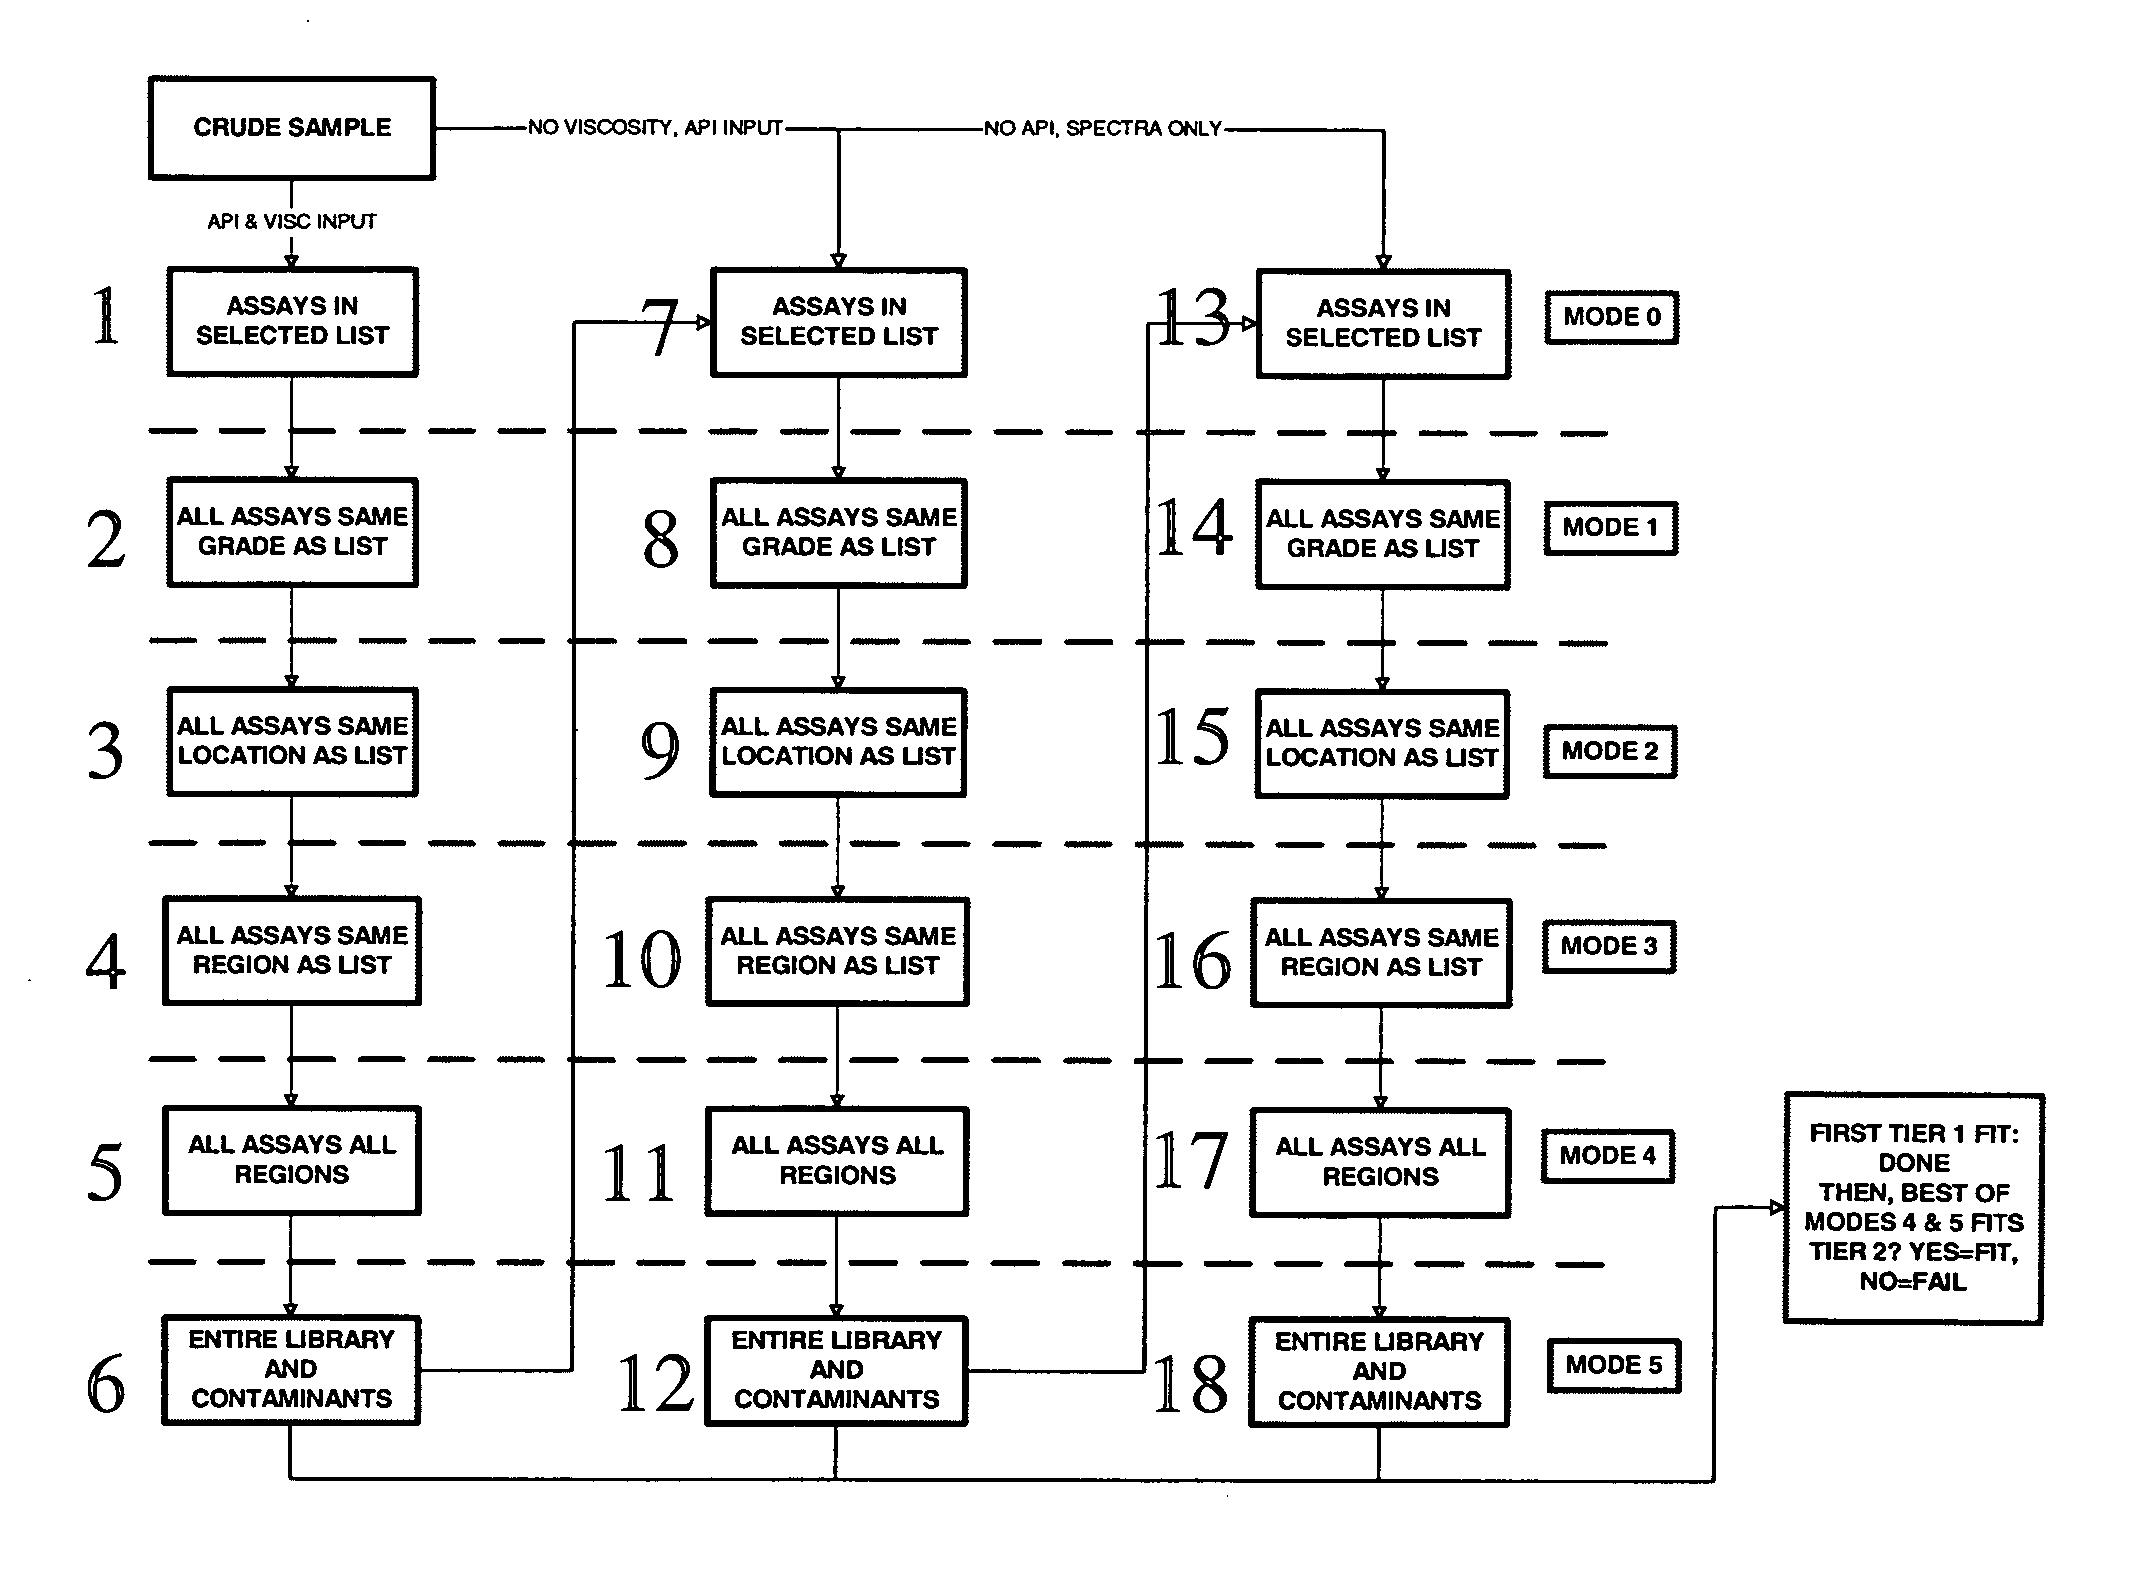 Method for analyzing an unknown material as a blend of known materials calculated so as to match certain analytical data and predicting properties of the unknown based on the calculated blend